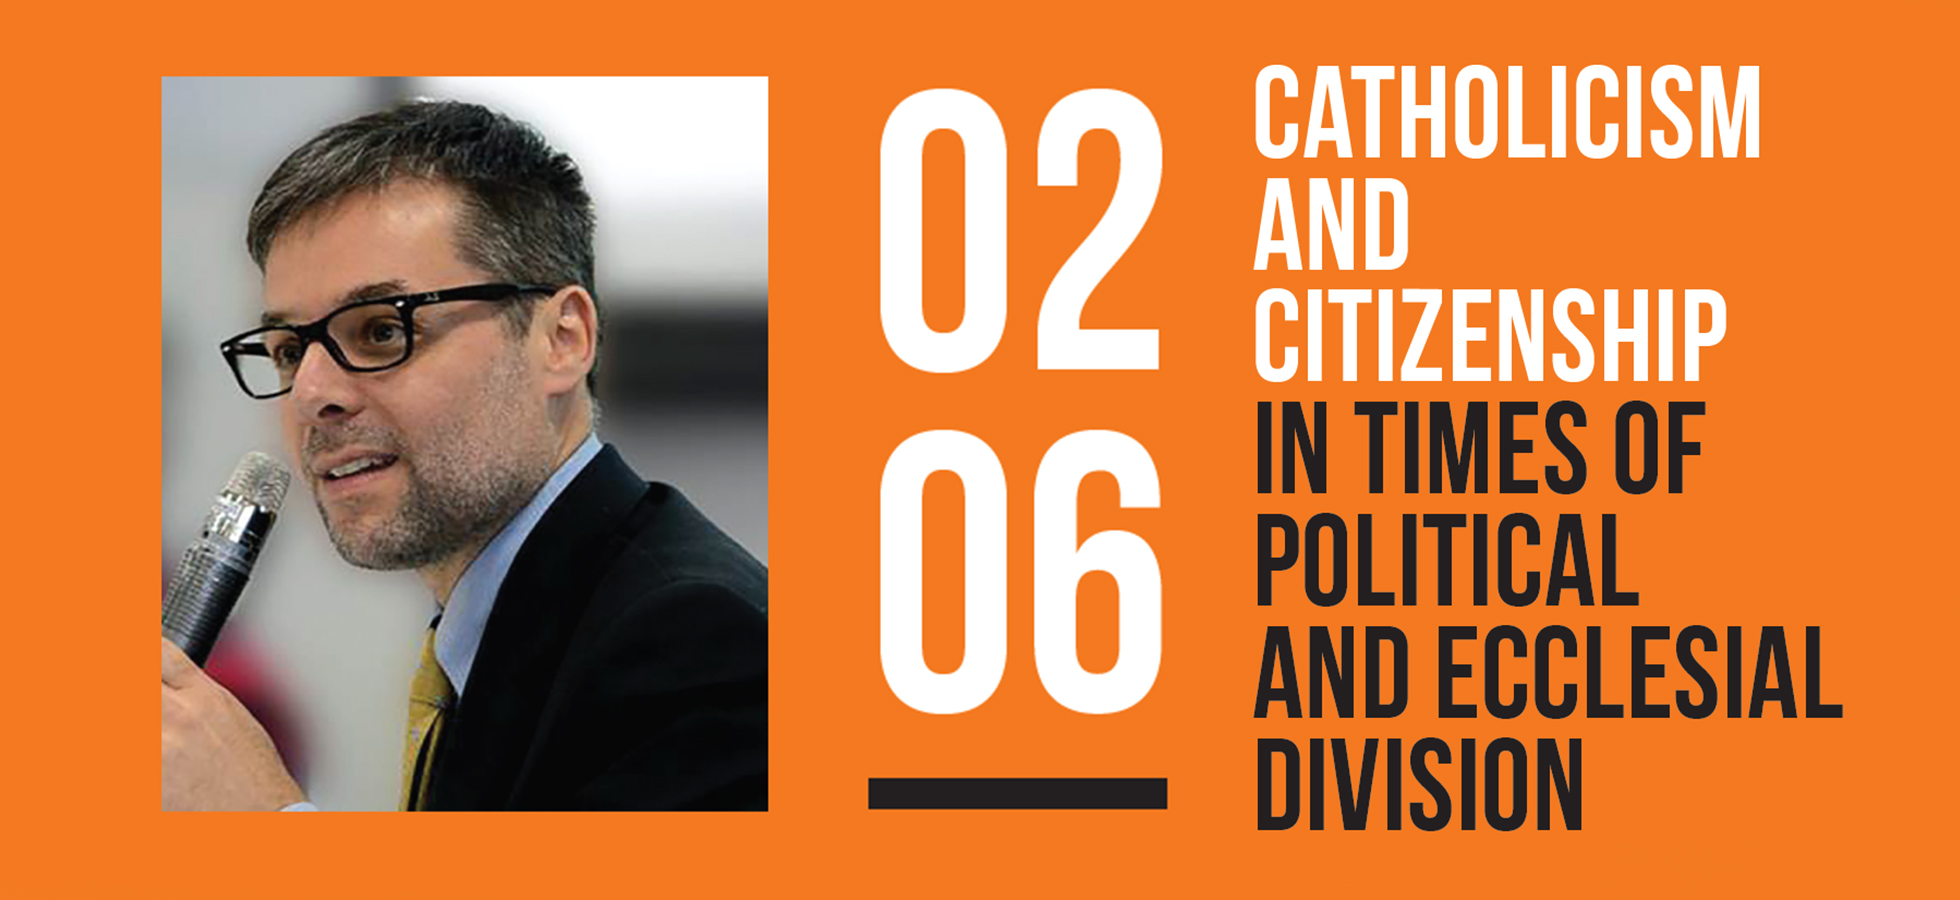 What is a Catholic’s Civic Duty Amid Political and Ecclesial Division?